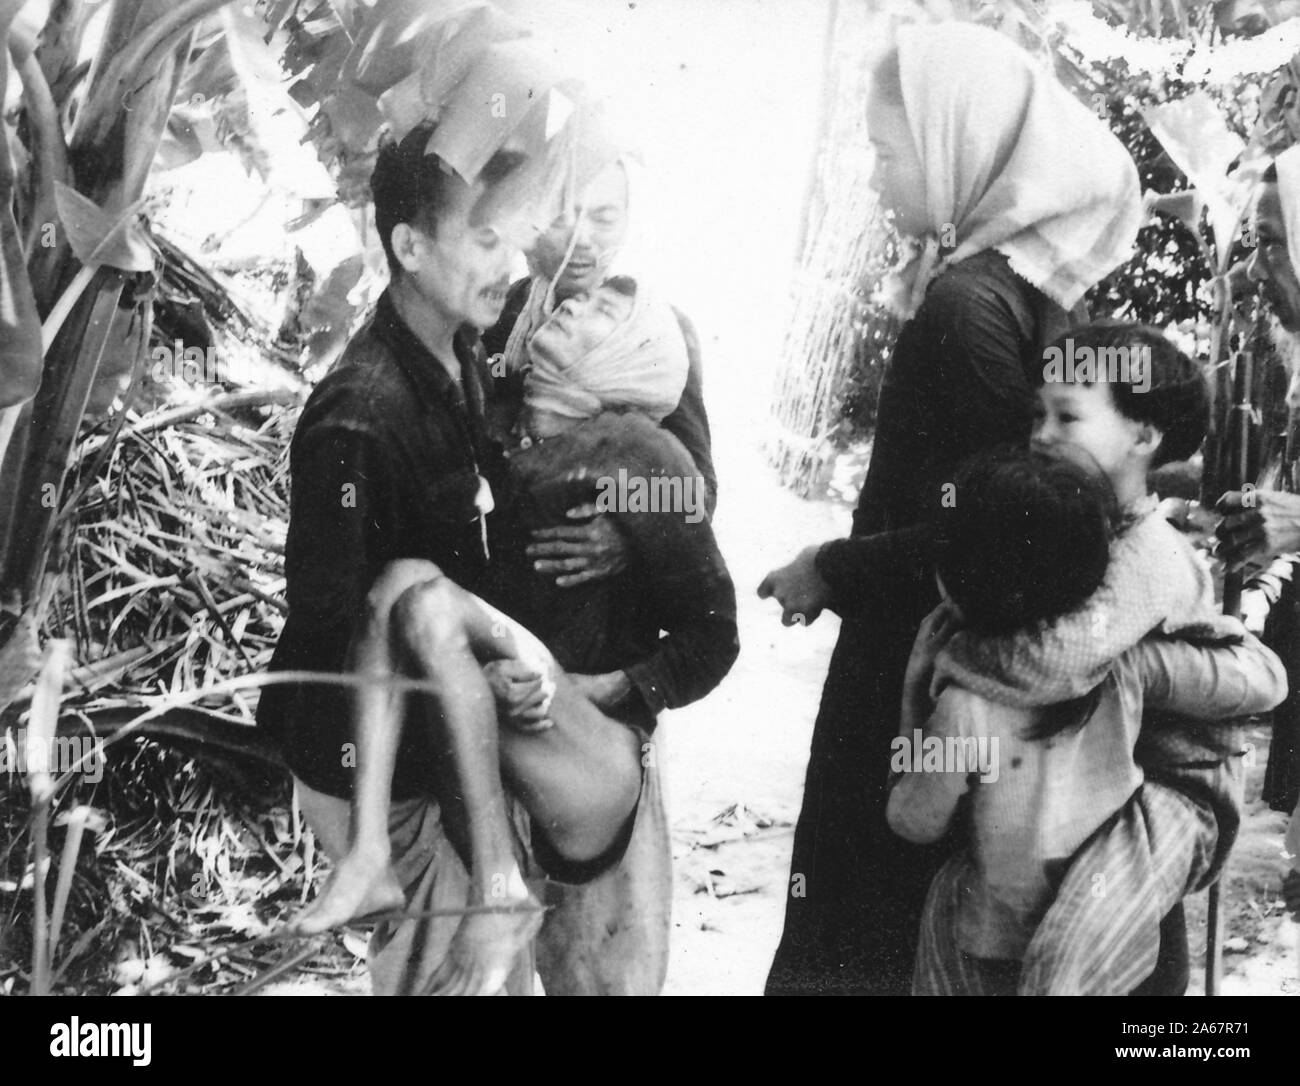 Vietnamese refugees stand in the jungle during the Vietnam War, with children and apparent casualties, 1975. () Stock Photo